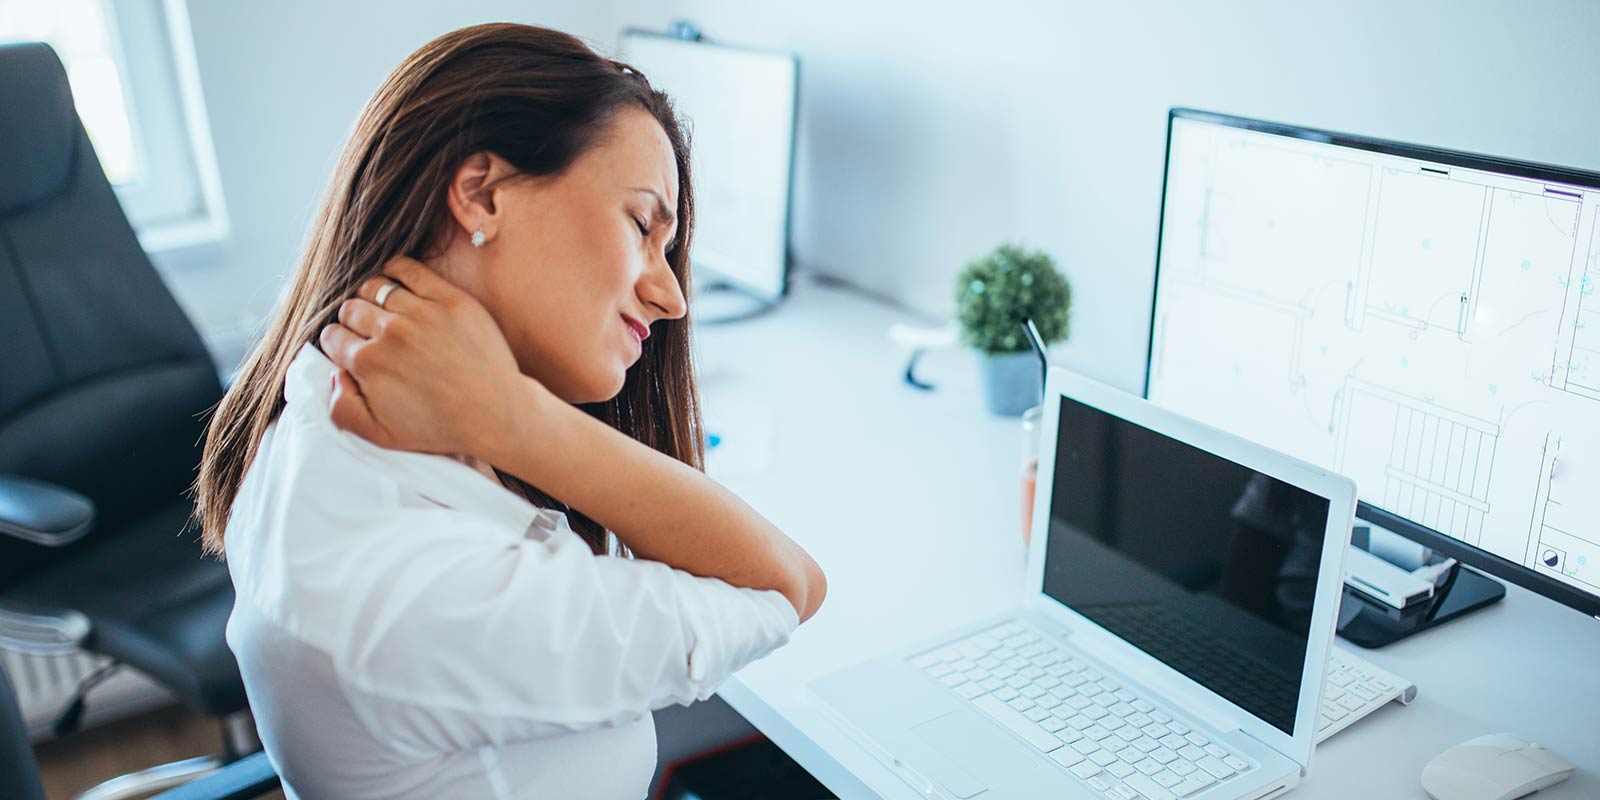 Woman in front to computer screen holds her painful neck.